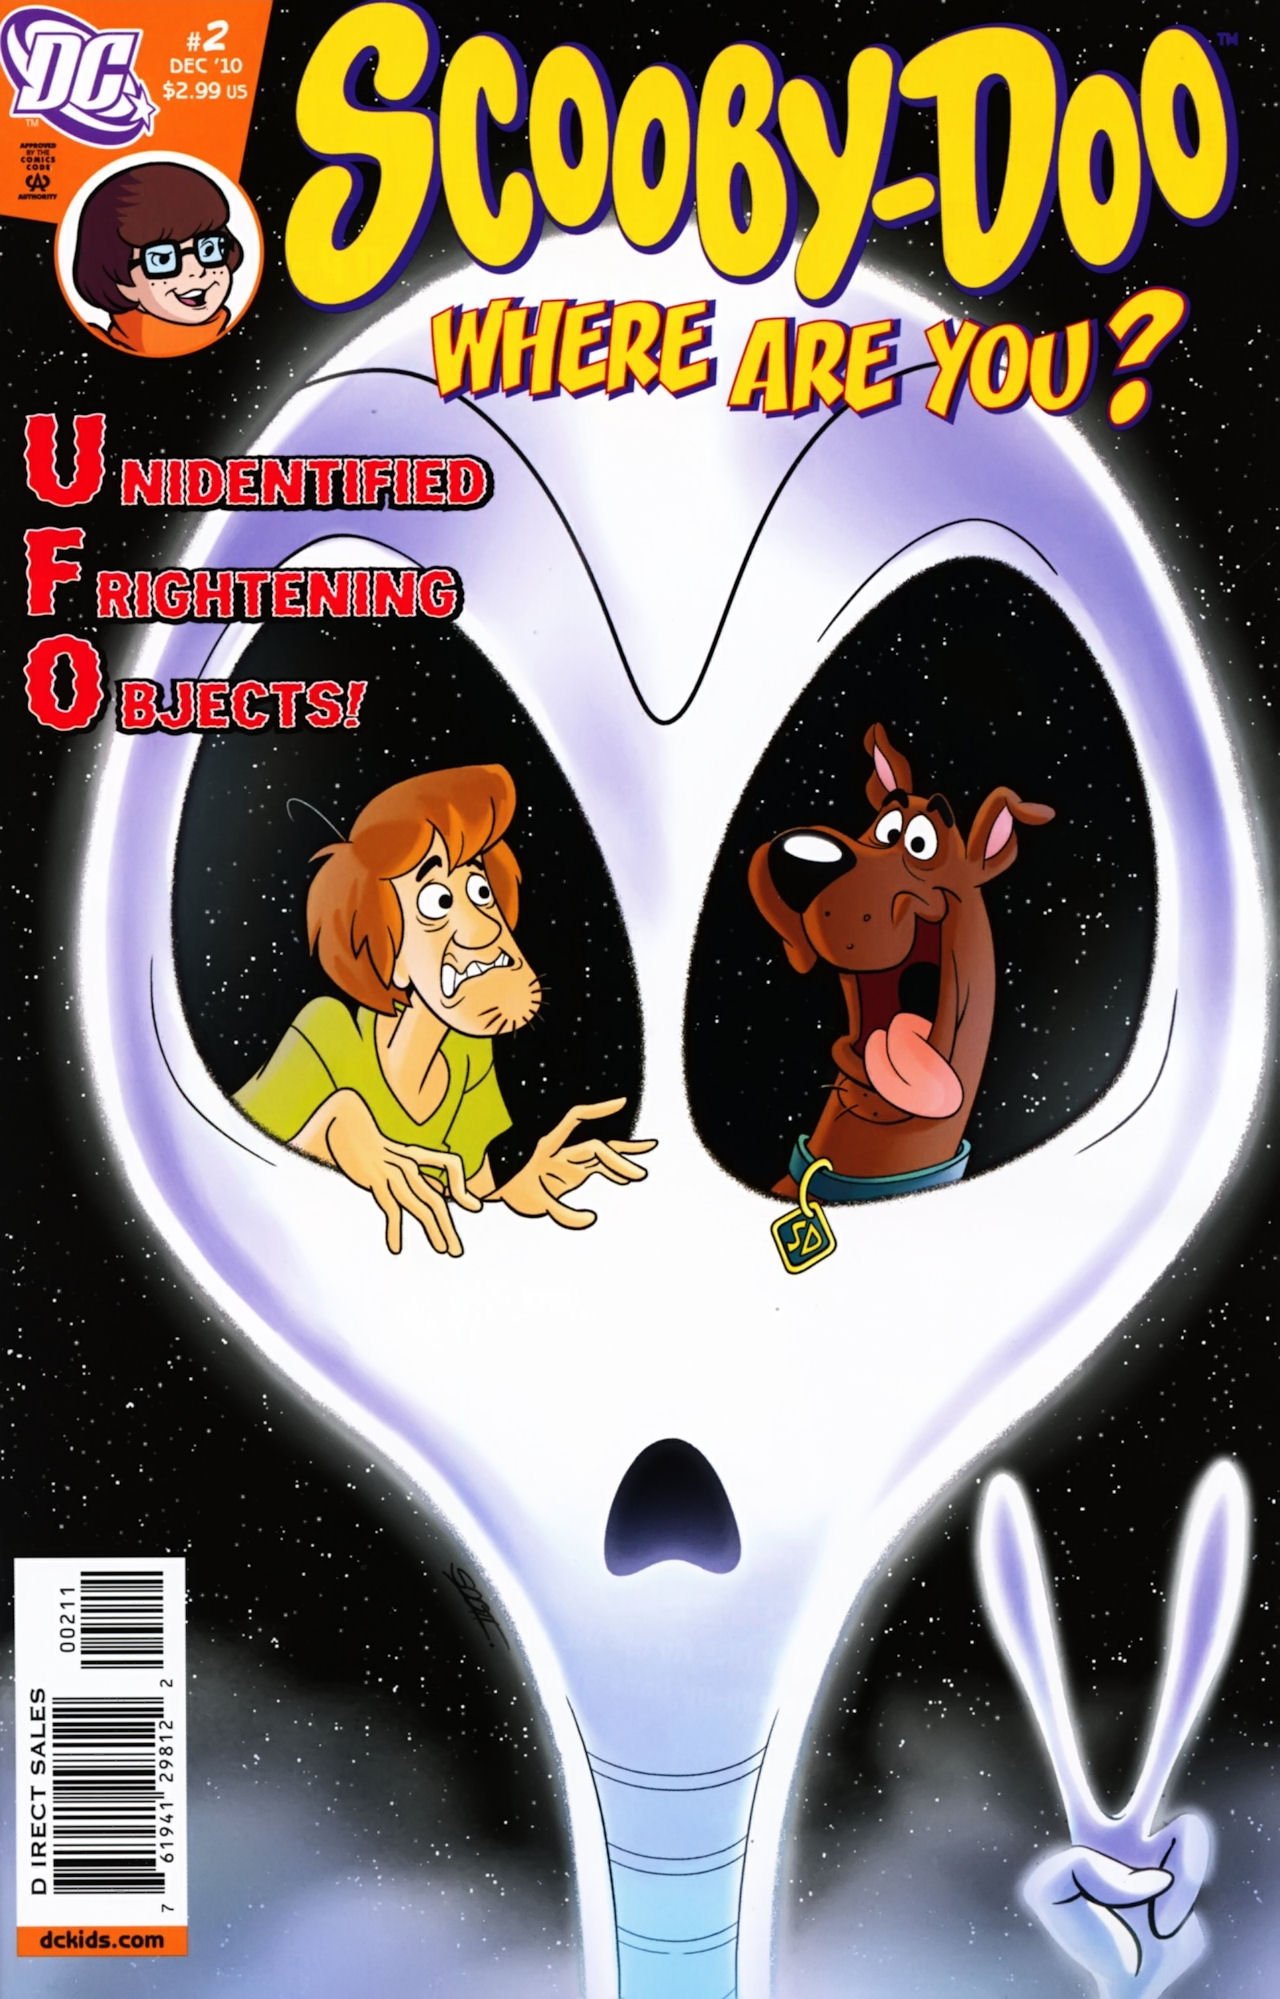 Scooby-Doo: Where Are You? 2 Page 0